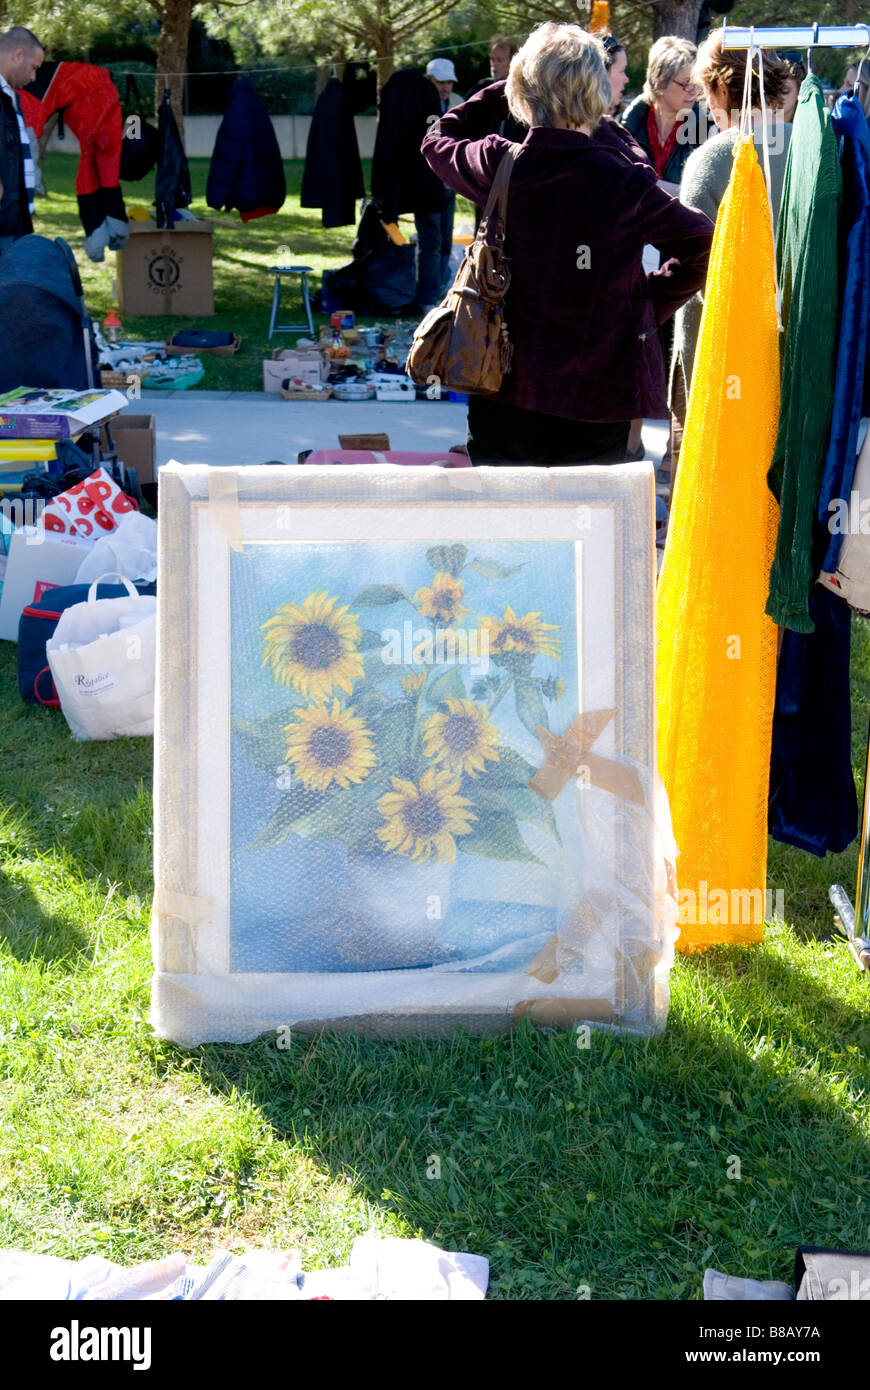 a kitsch painting of vase of sunflowers wrapped in bubble wrap on sale at car-boot sale in park Stock Photo